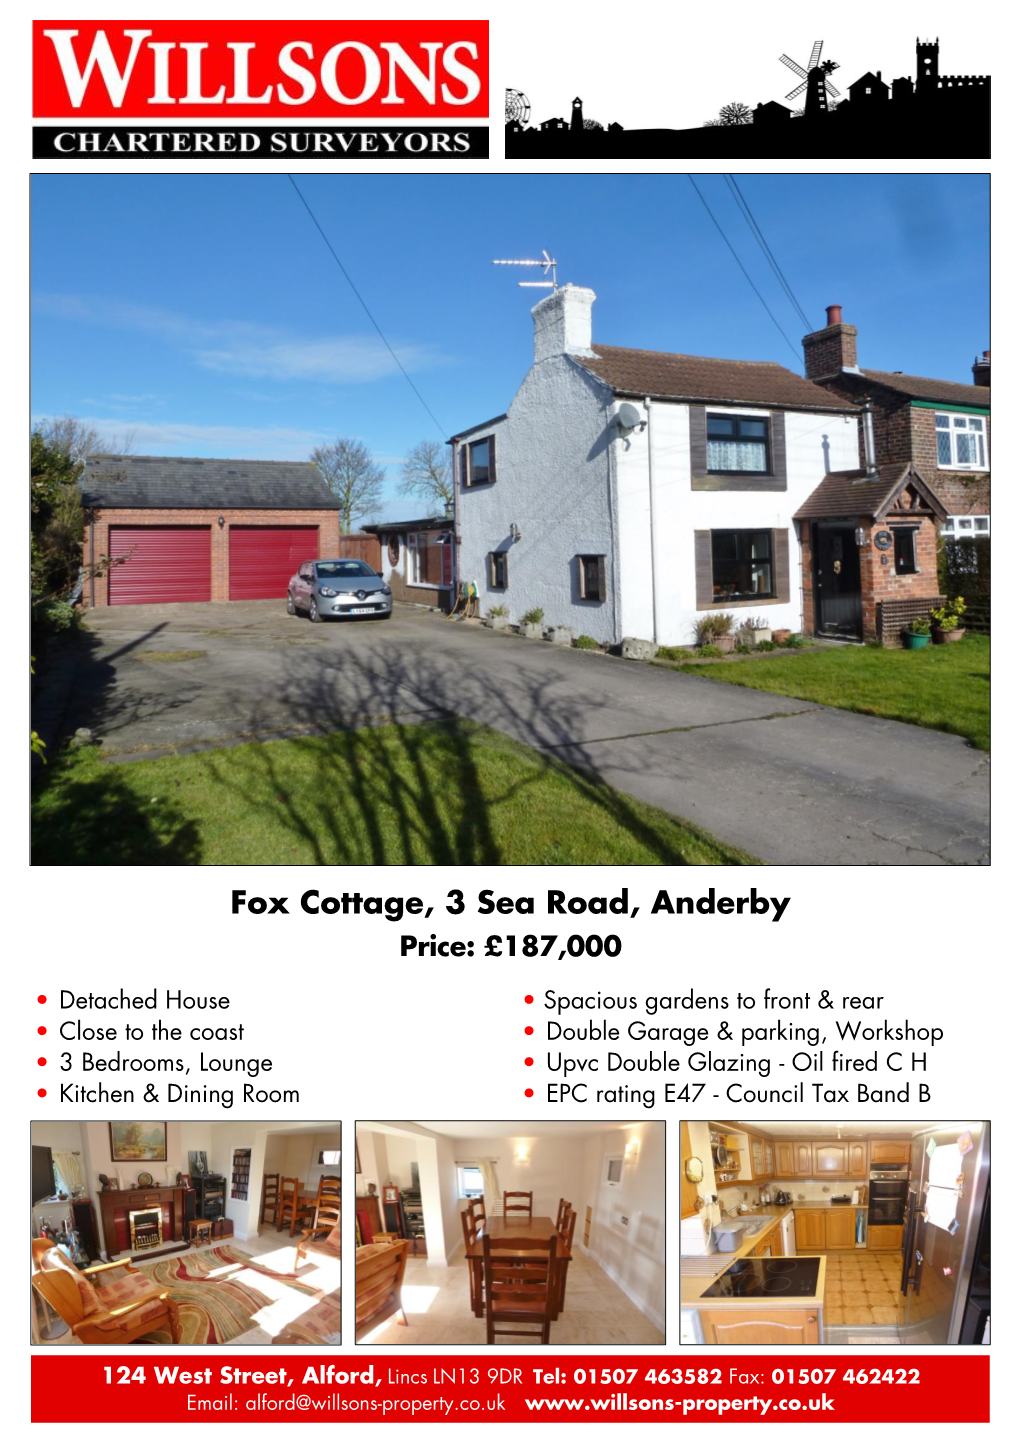 Fox Cottage, 3 Sea Road, Anderby